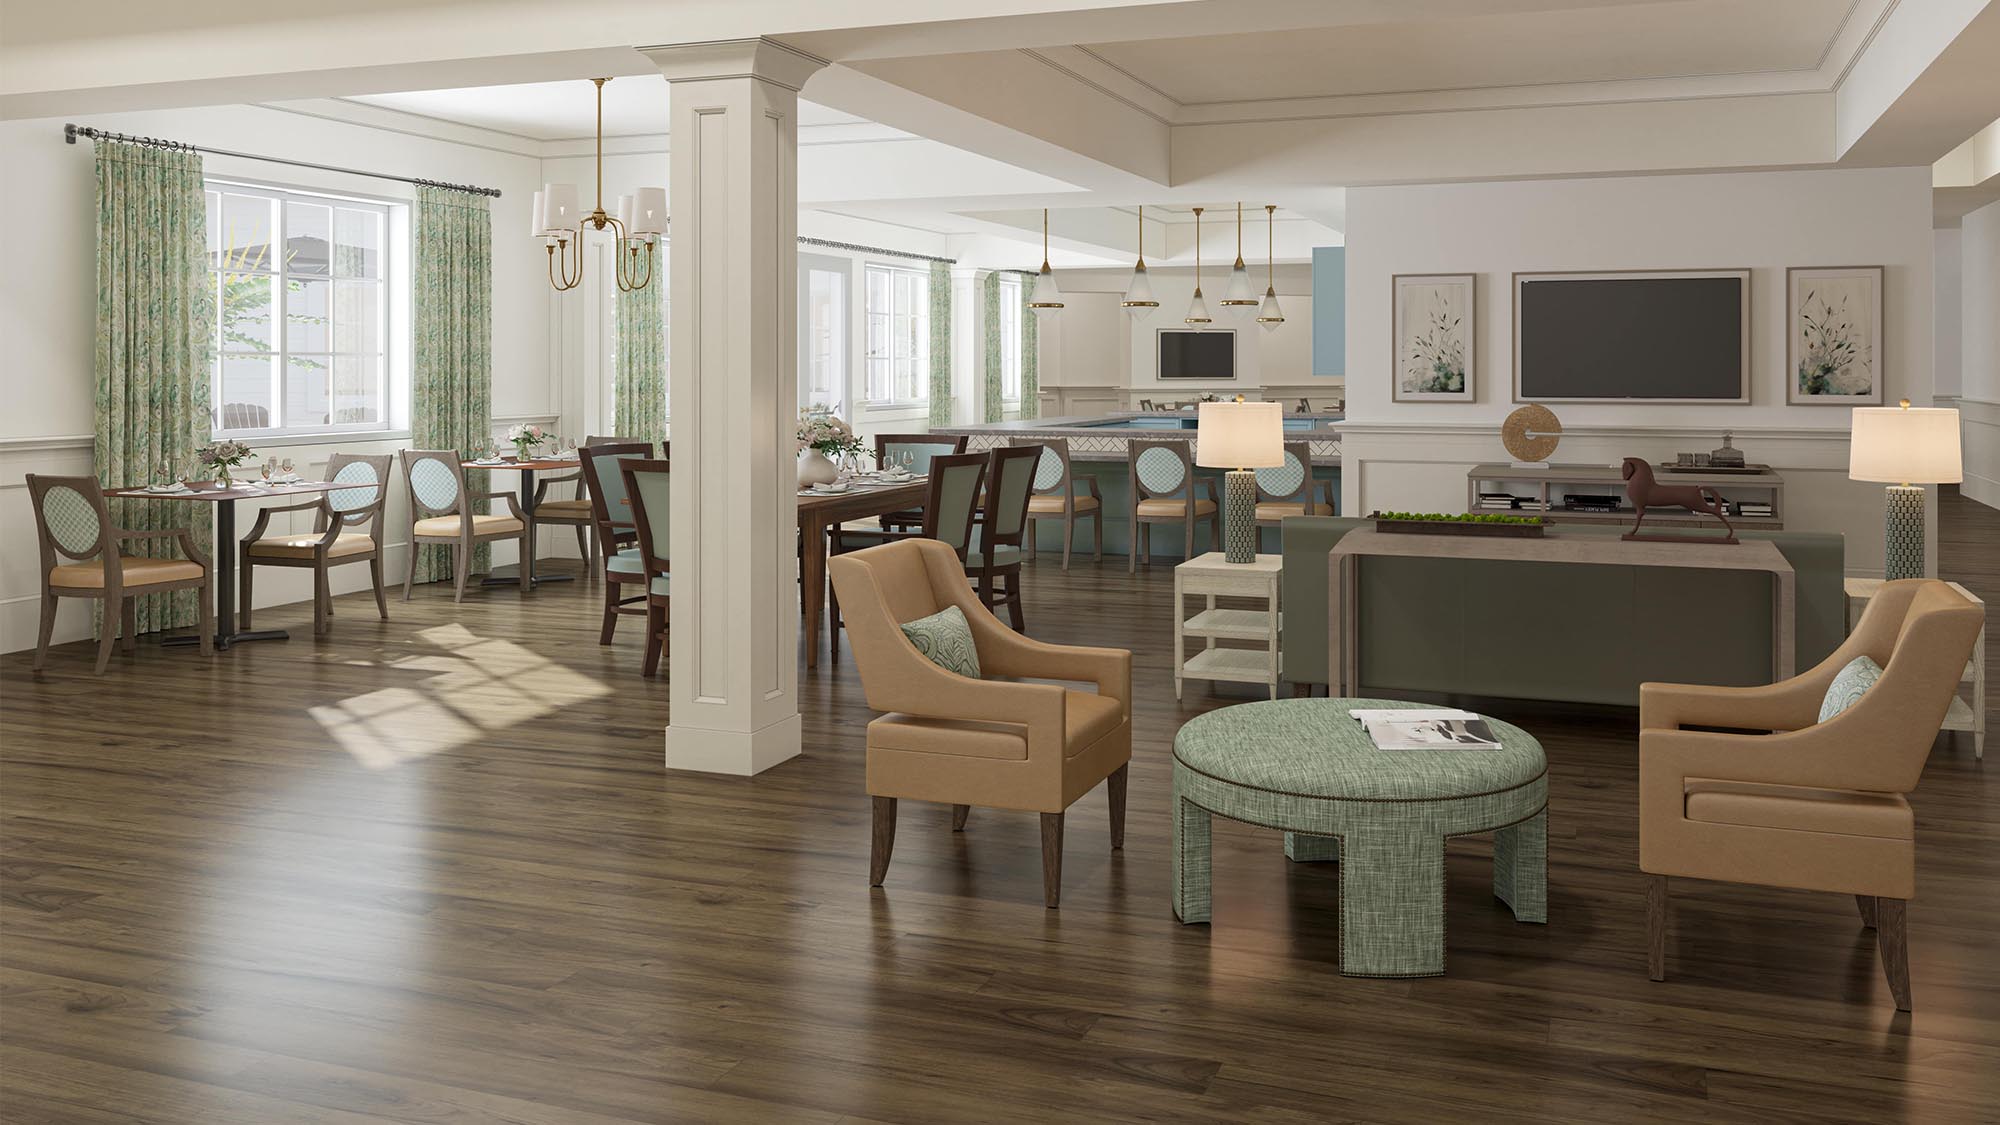 West Cobb memory Care Dining Room